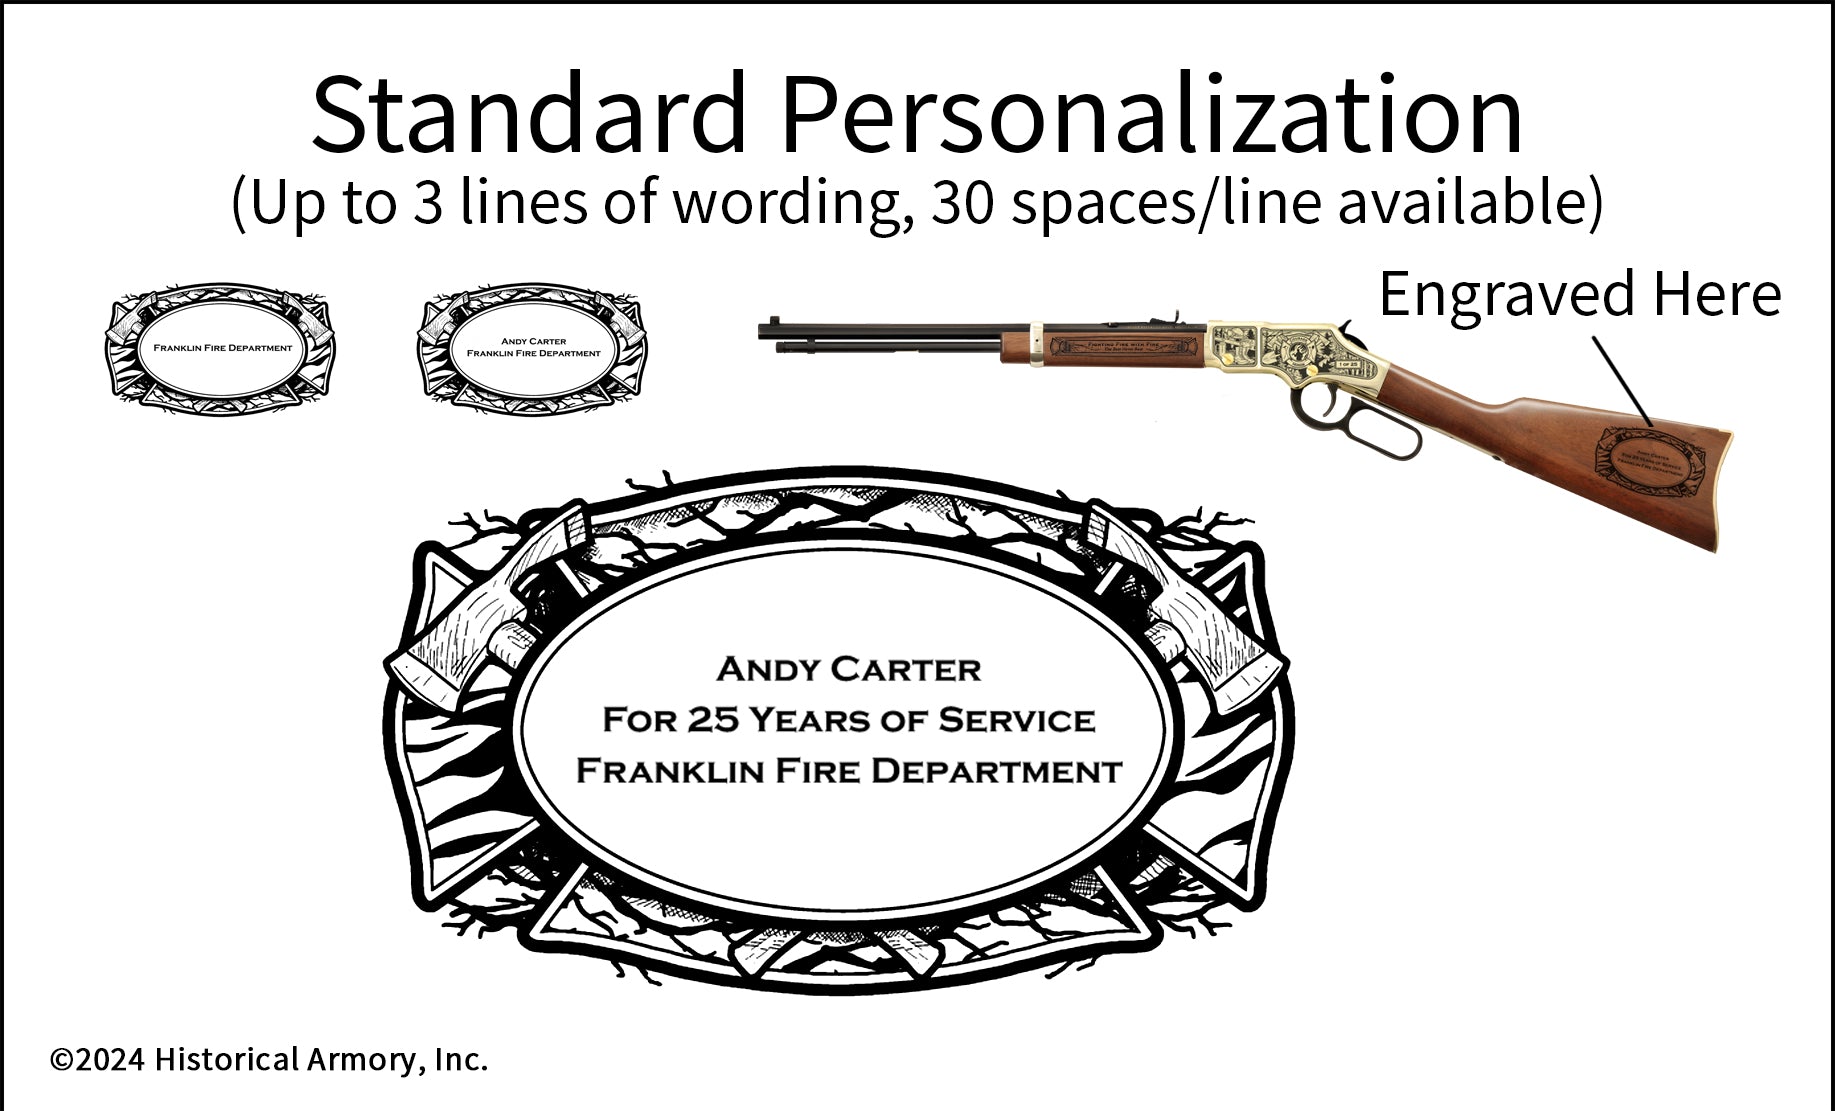 Wildland Firefighter Engraved Rifle Personalization